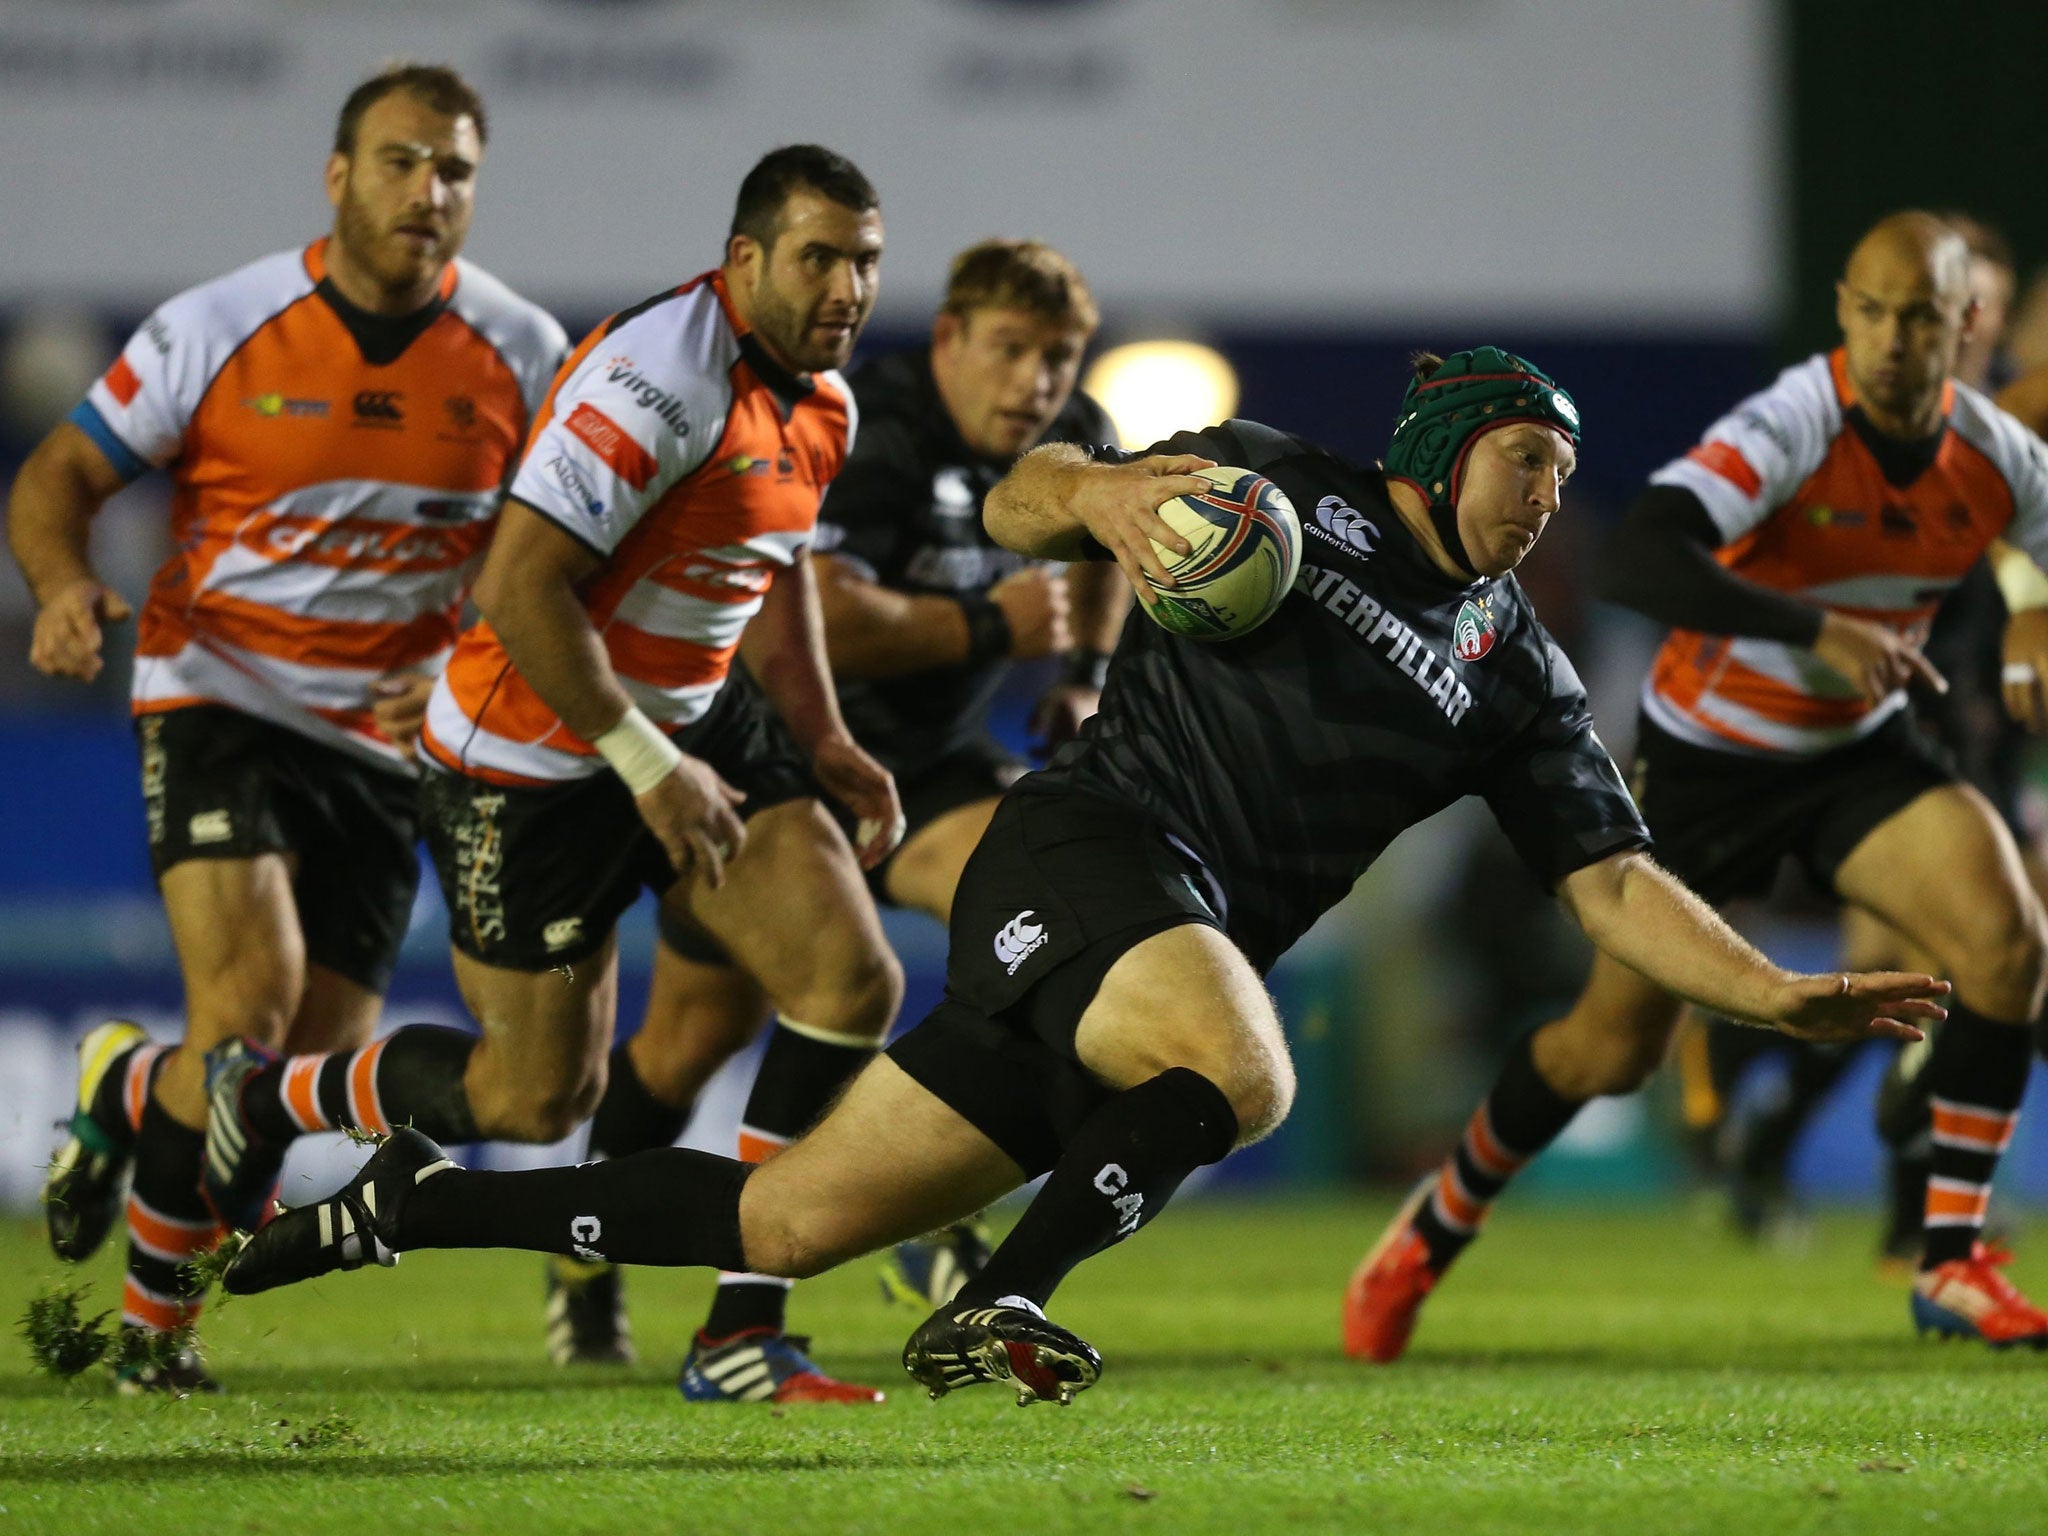 Leicester's Thomas Waldrom breaks through the Treviso defence